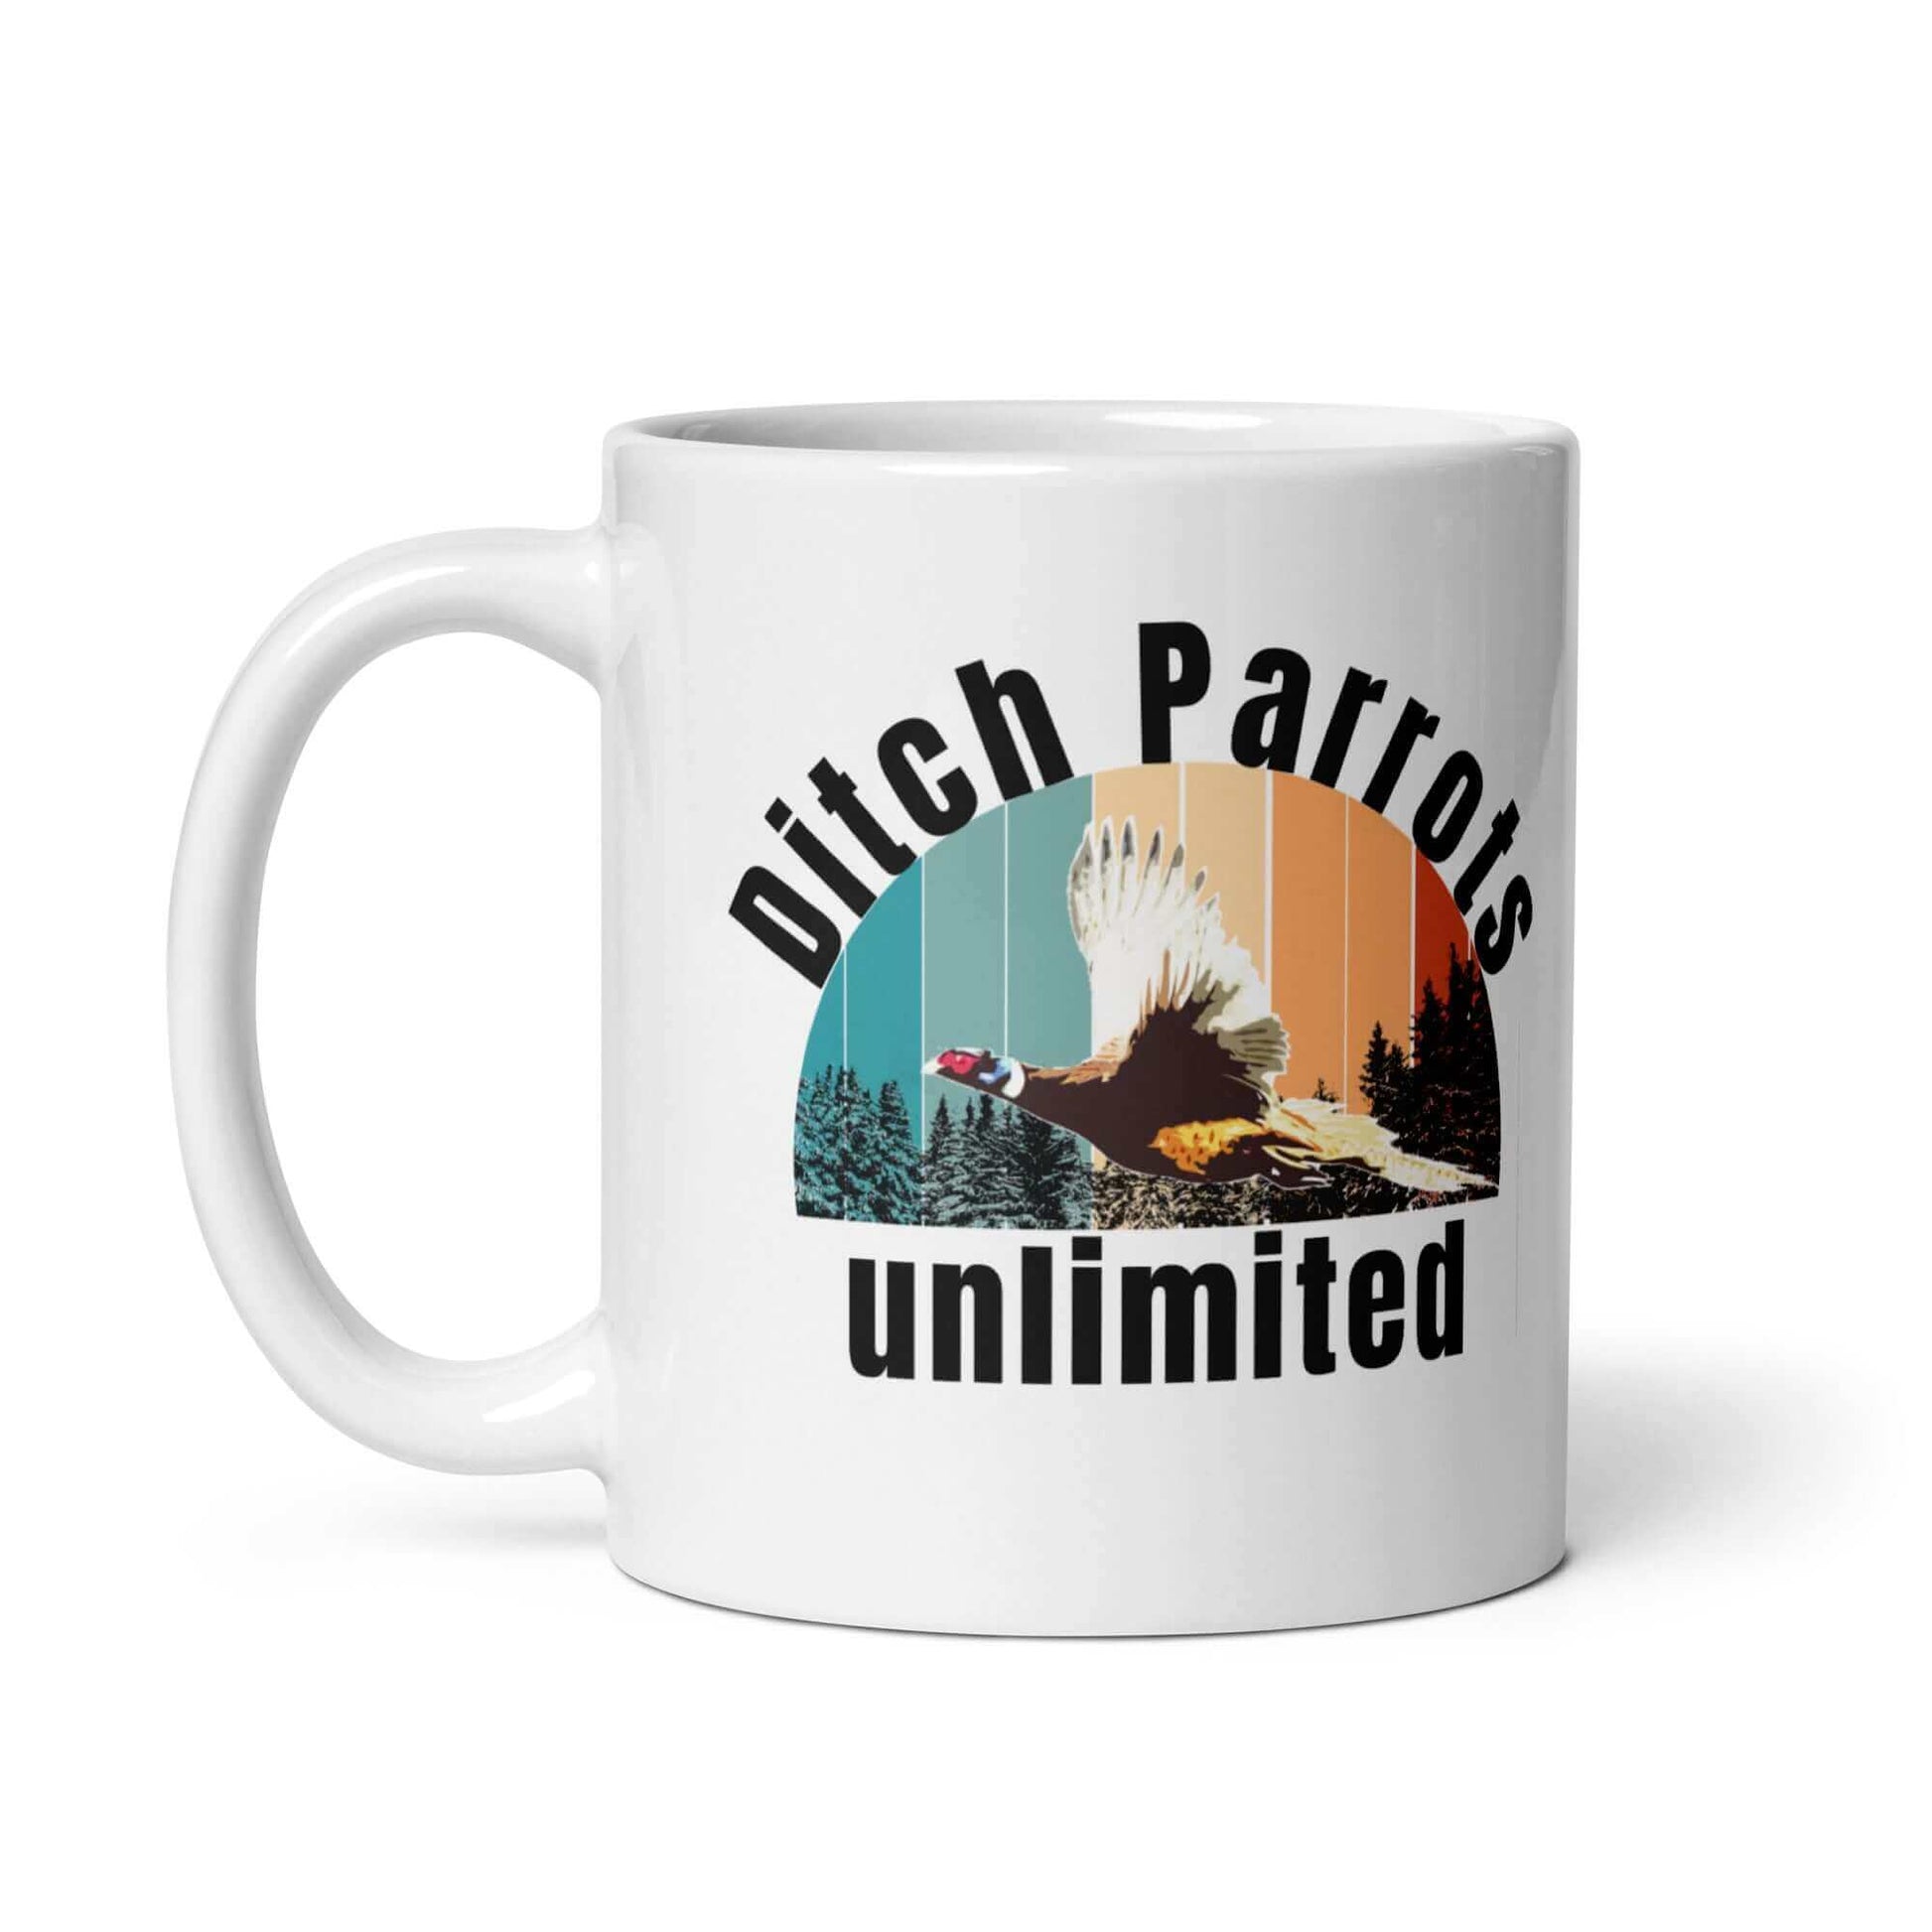 Ditch Parrots Unlimited - White glossy mug - Horrible Designs